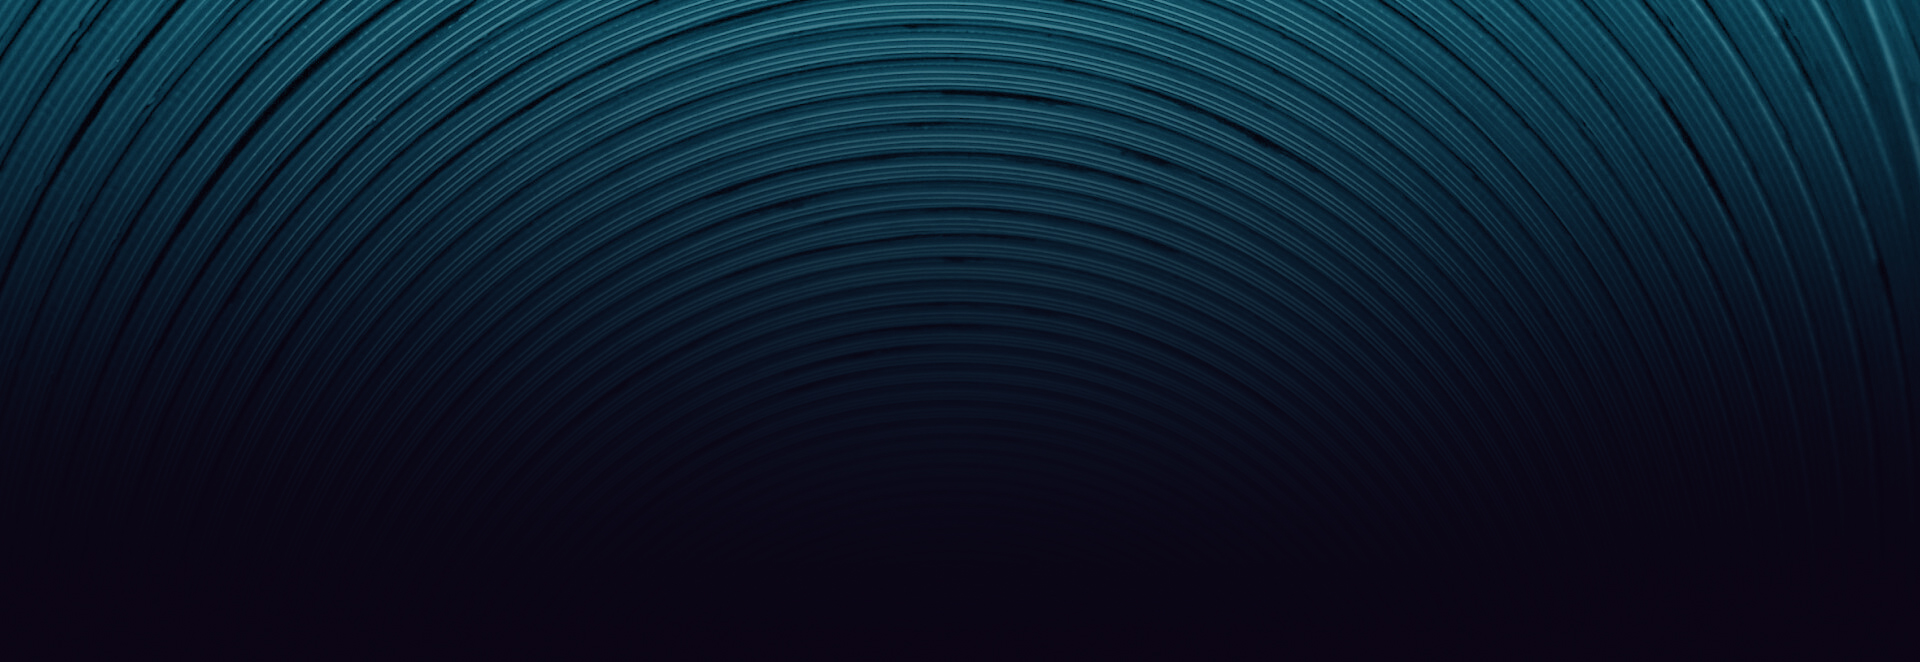 Dark blue graphic with geometric concentric circles